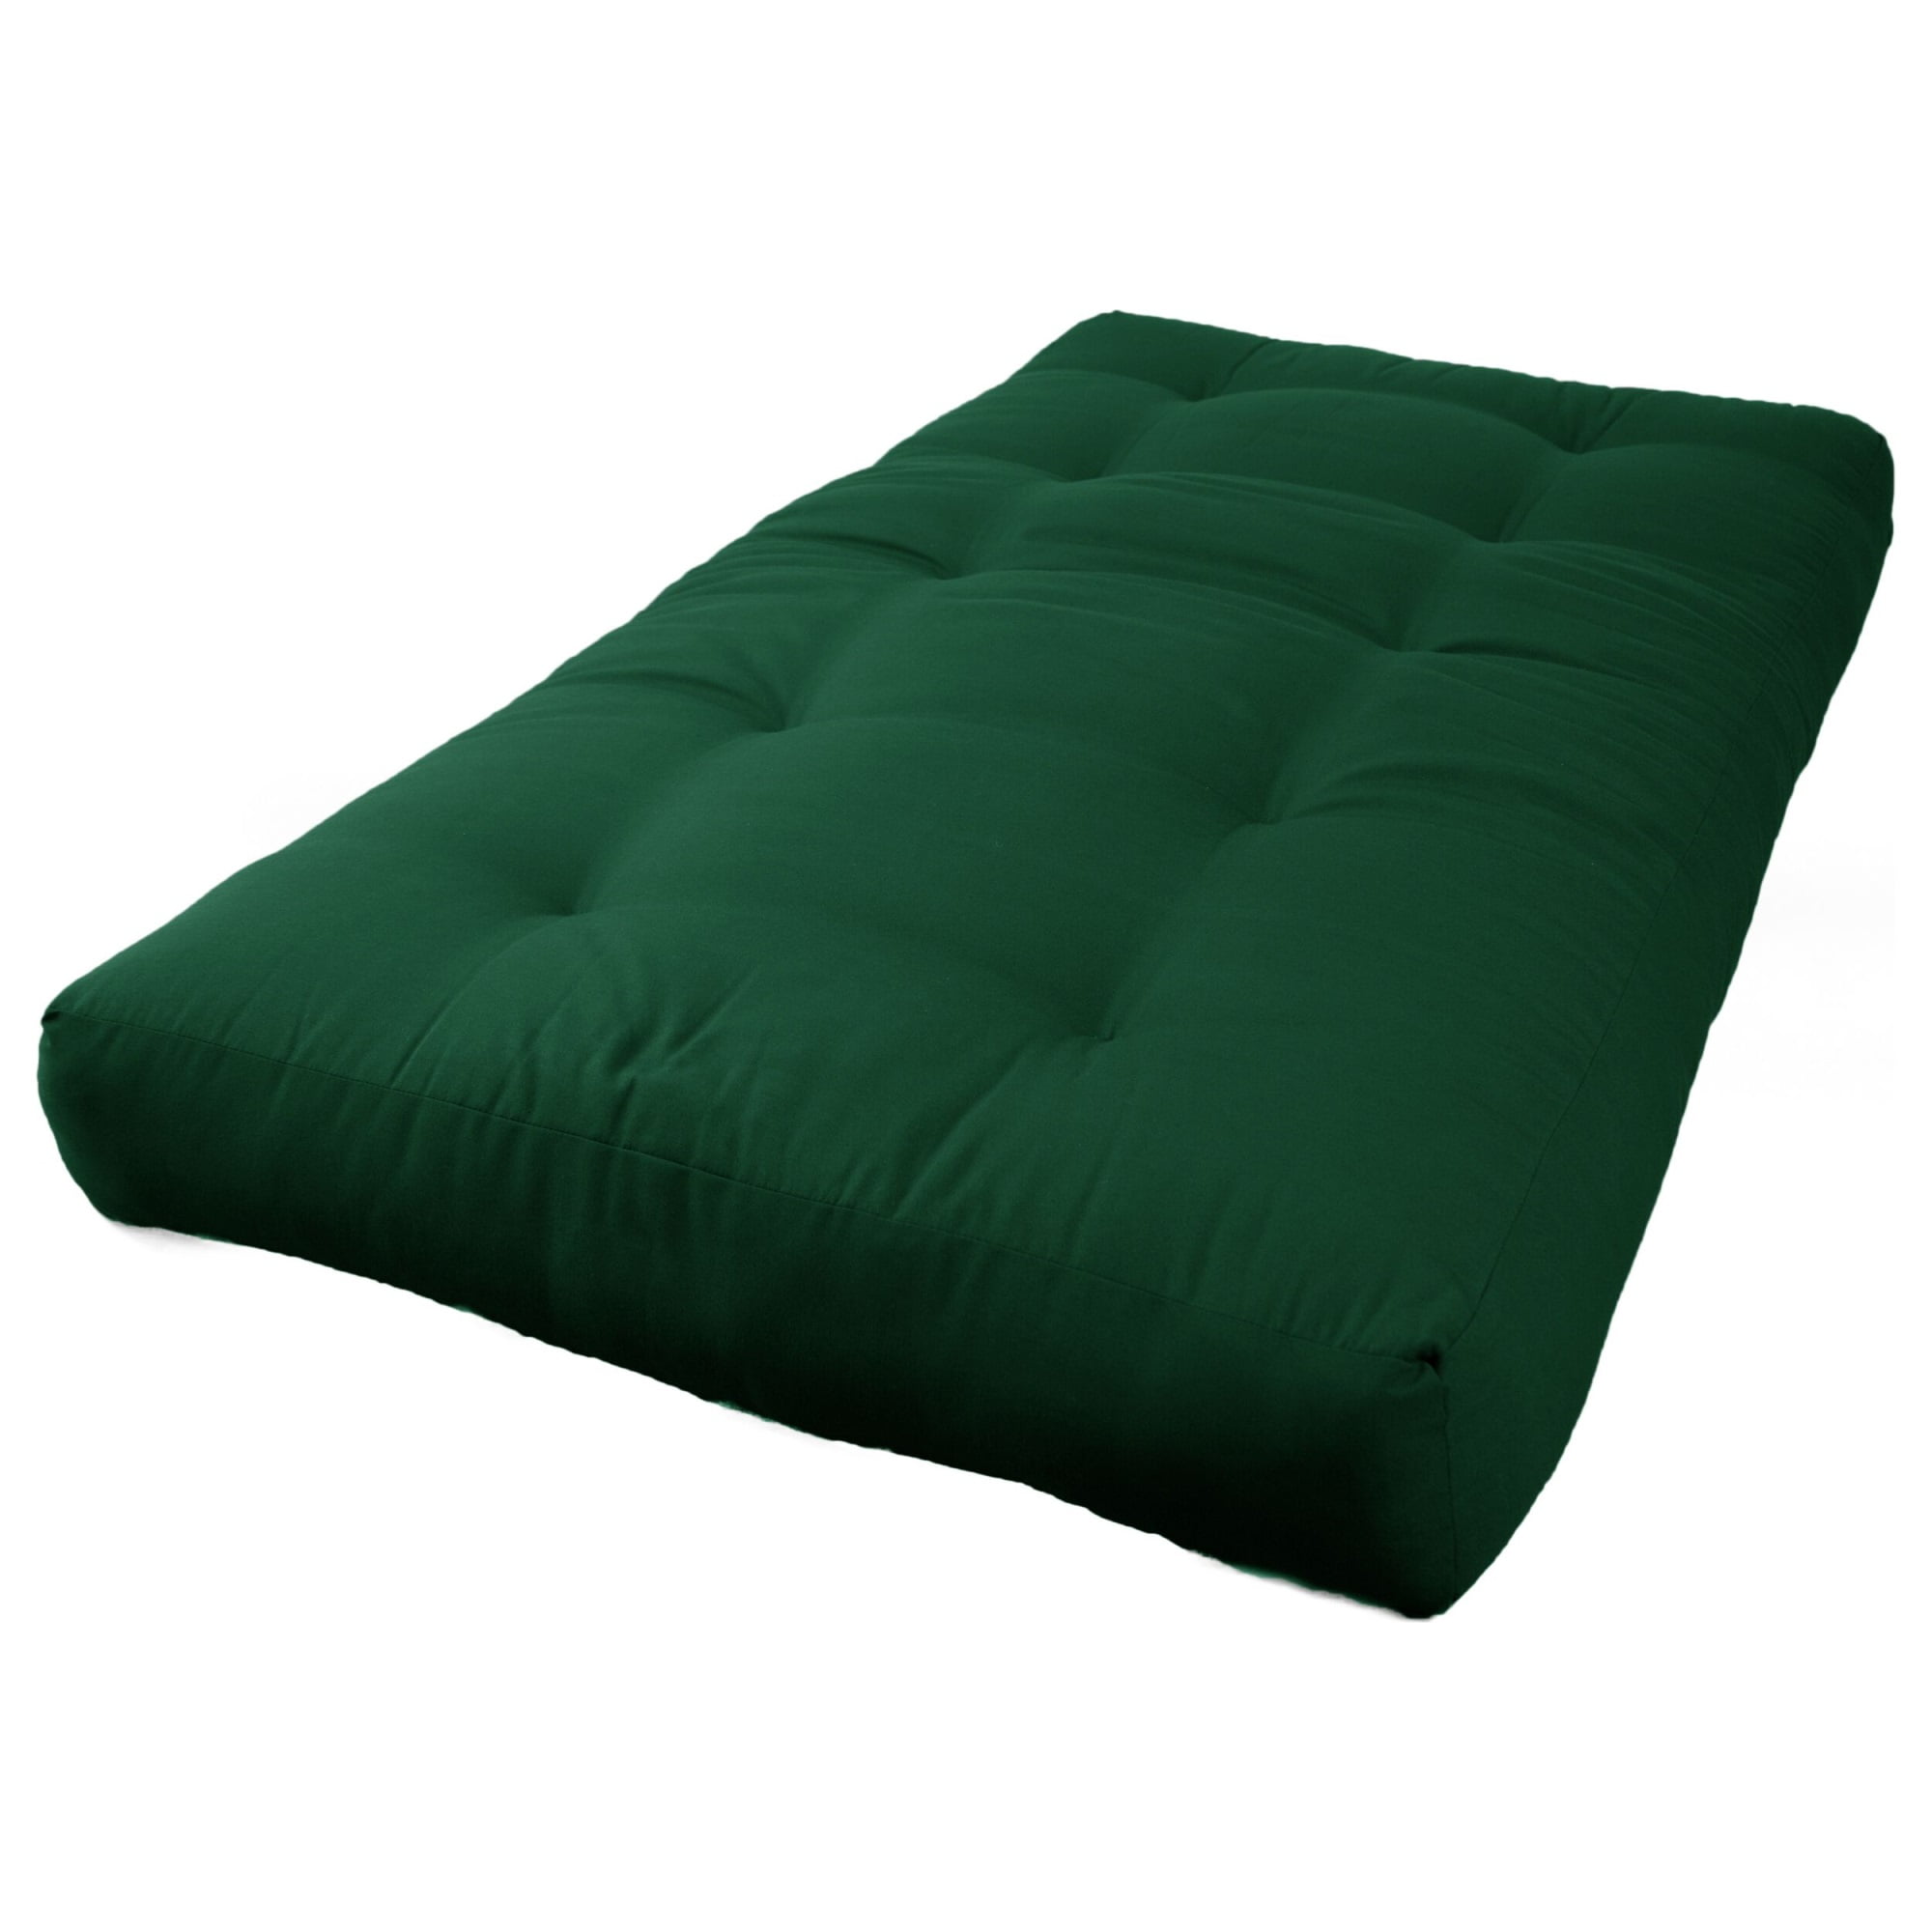 Picture of Blazing Needles 9601-B-TW-FG 7 in. Renewal Twill Twin Size Futon Mattress, Forest Green